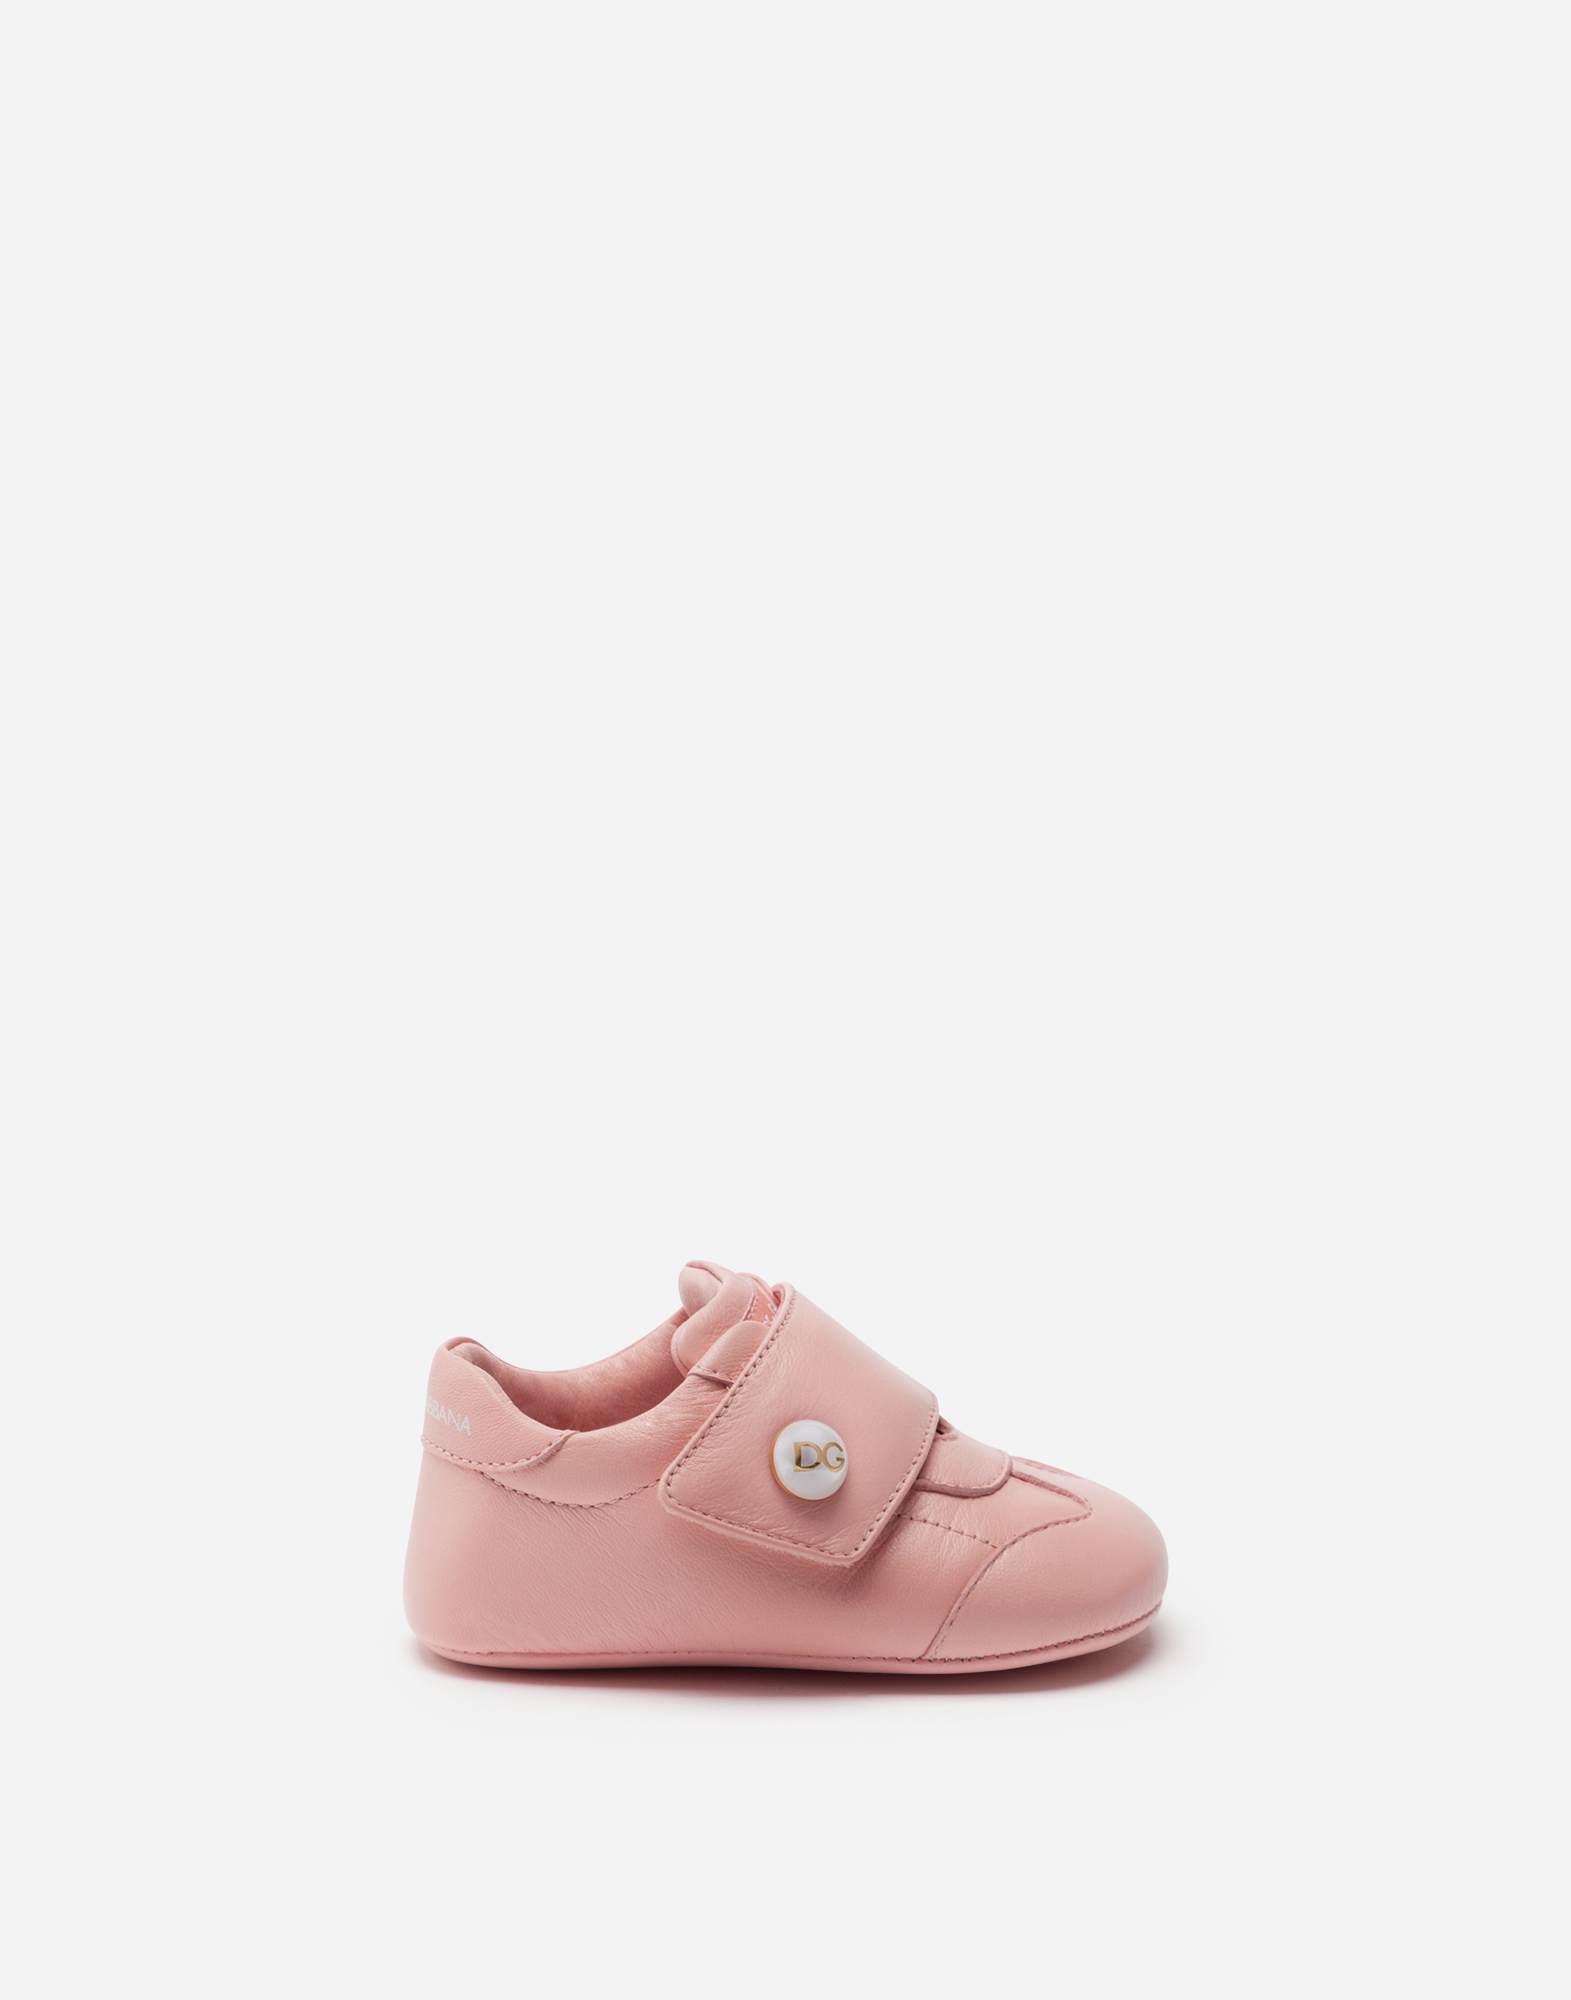 Nappa leather sneakers with DG logo pearl in Pink